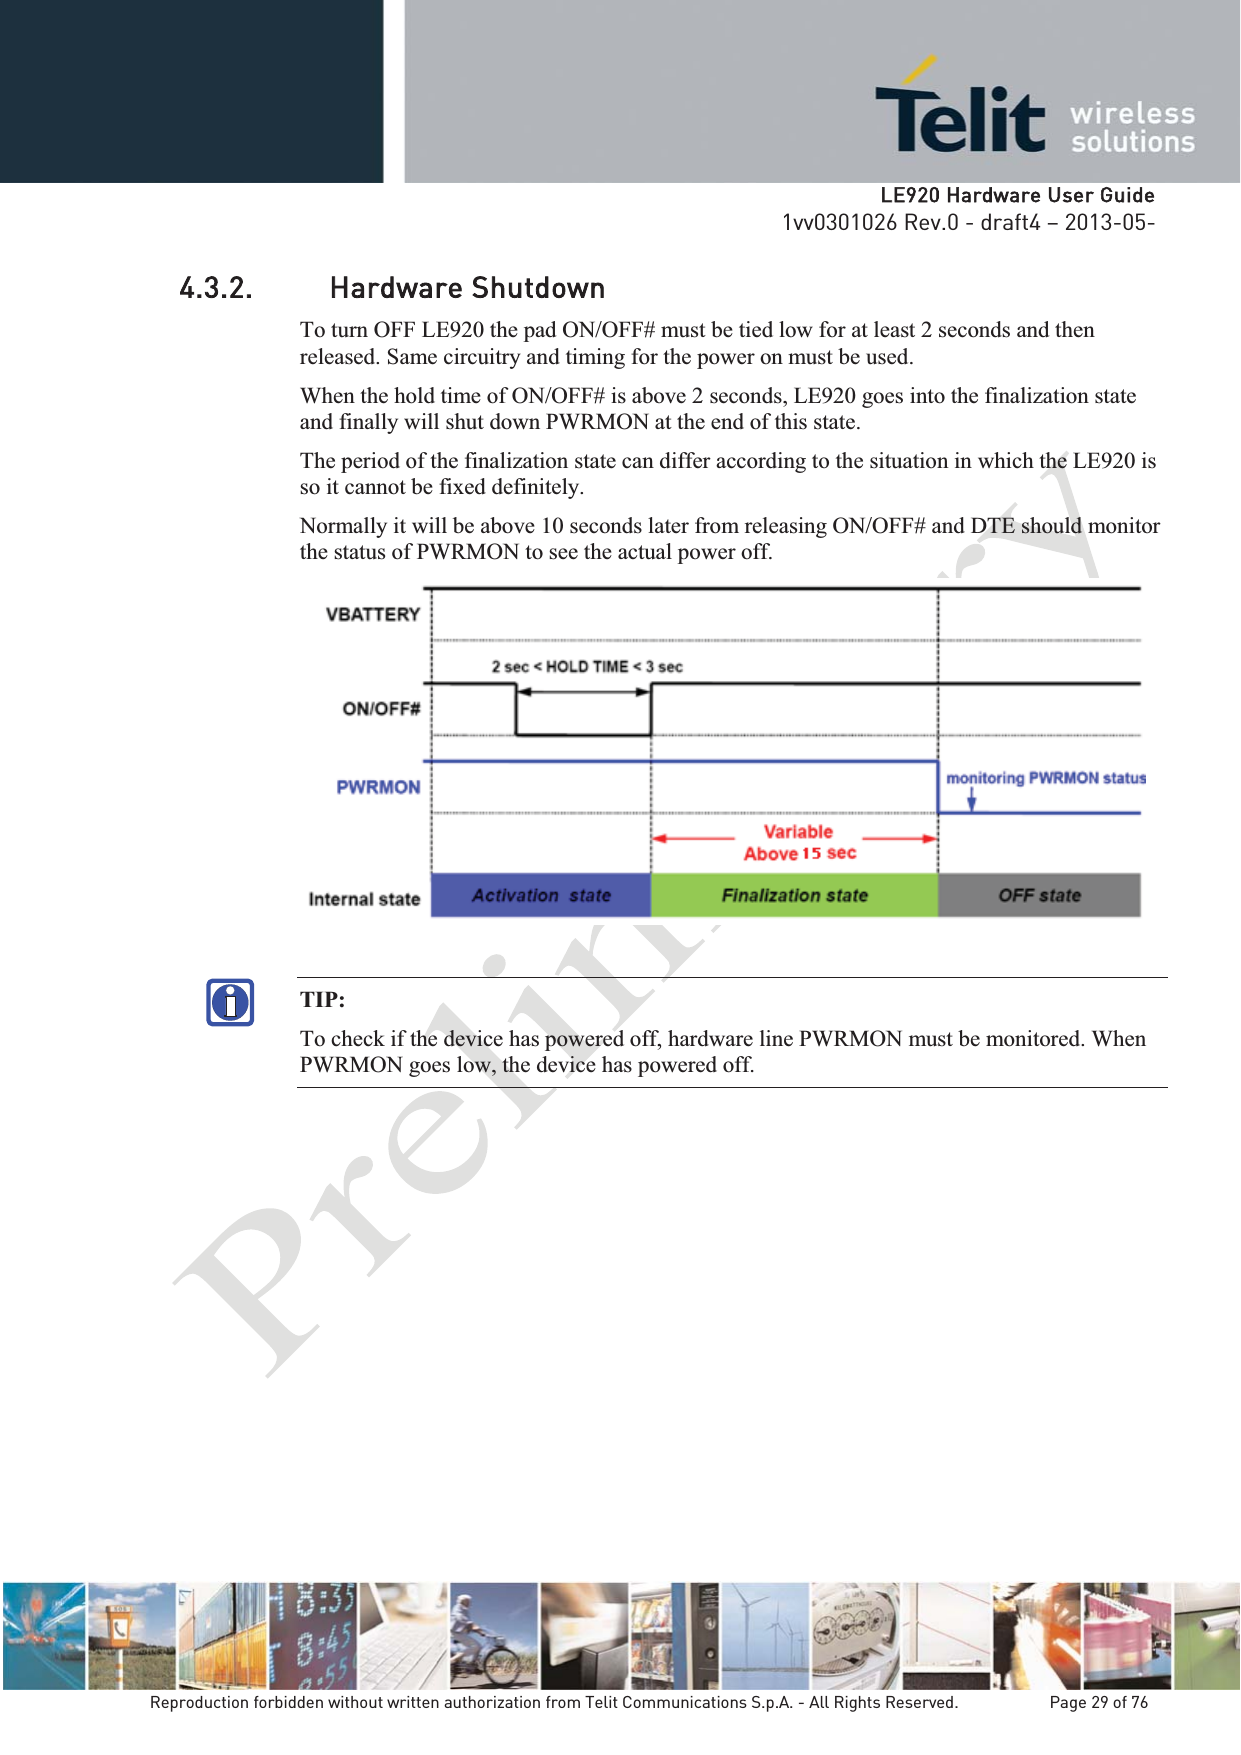   LLE920 Hardware User Guide1vv0301026 Rev.0 - draft4 – 2013-05-Reproduction forbidden without written authorization from Telit Communications S.p.A. - All Rights Reserved.    Page 29 of 76 4.3.2. Hardware Shutdown To turn OFF LE920 the pad ON/OFF# must be tied low for at least 2 seconds and then released. Same circuitry and timing for the power on must be used. When the hold time of ON/OFF# is above 2 seconds, LE920 goes into the finalization state and finally will shut down PWRMON at the end of this state. The period of the finalization state can differ according to the situation in which the LE920 is so it cannot be fixed definitely. Normally it will be above 10 seconds later from releasing ON/OFF# and DTE should monitor the status of PWRMON to see the actual power off.   TIP:  To check if the device has powered off, hardware line PWRMON must be monitored. When PWRMON goes low, the device has powered off. 